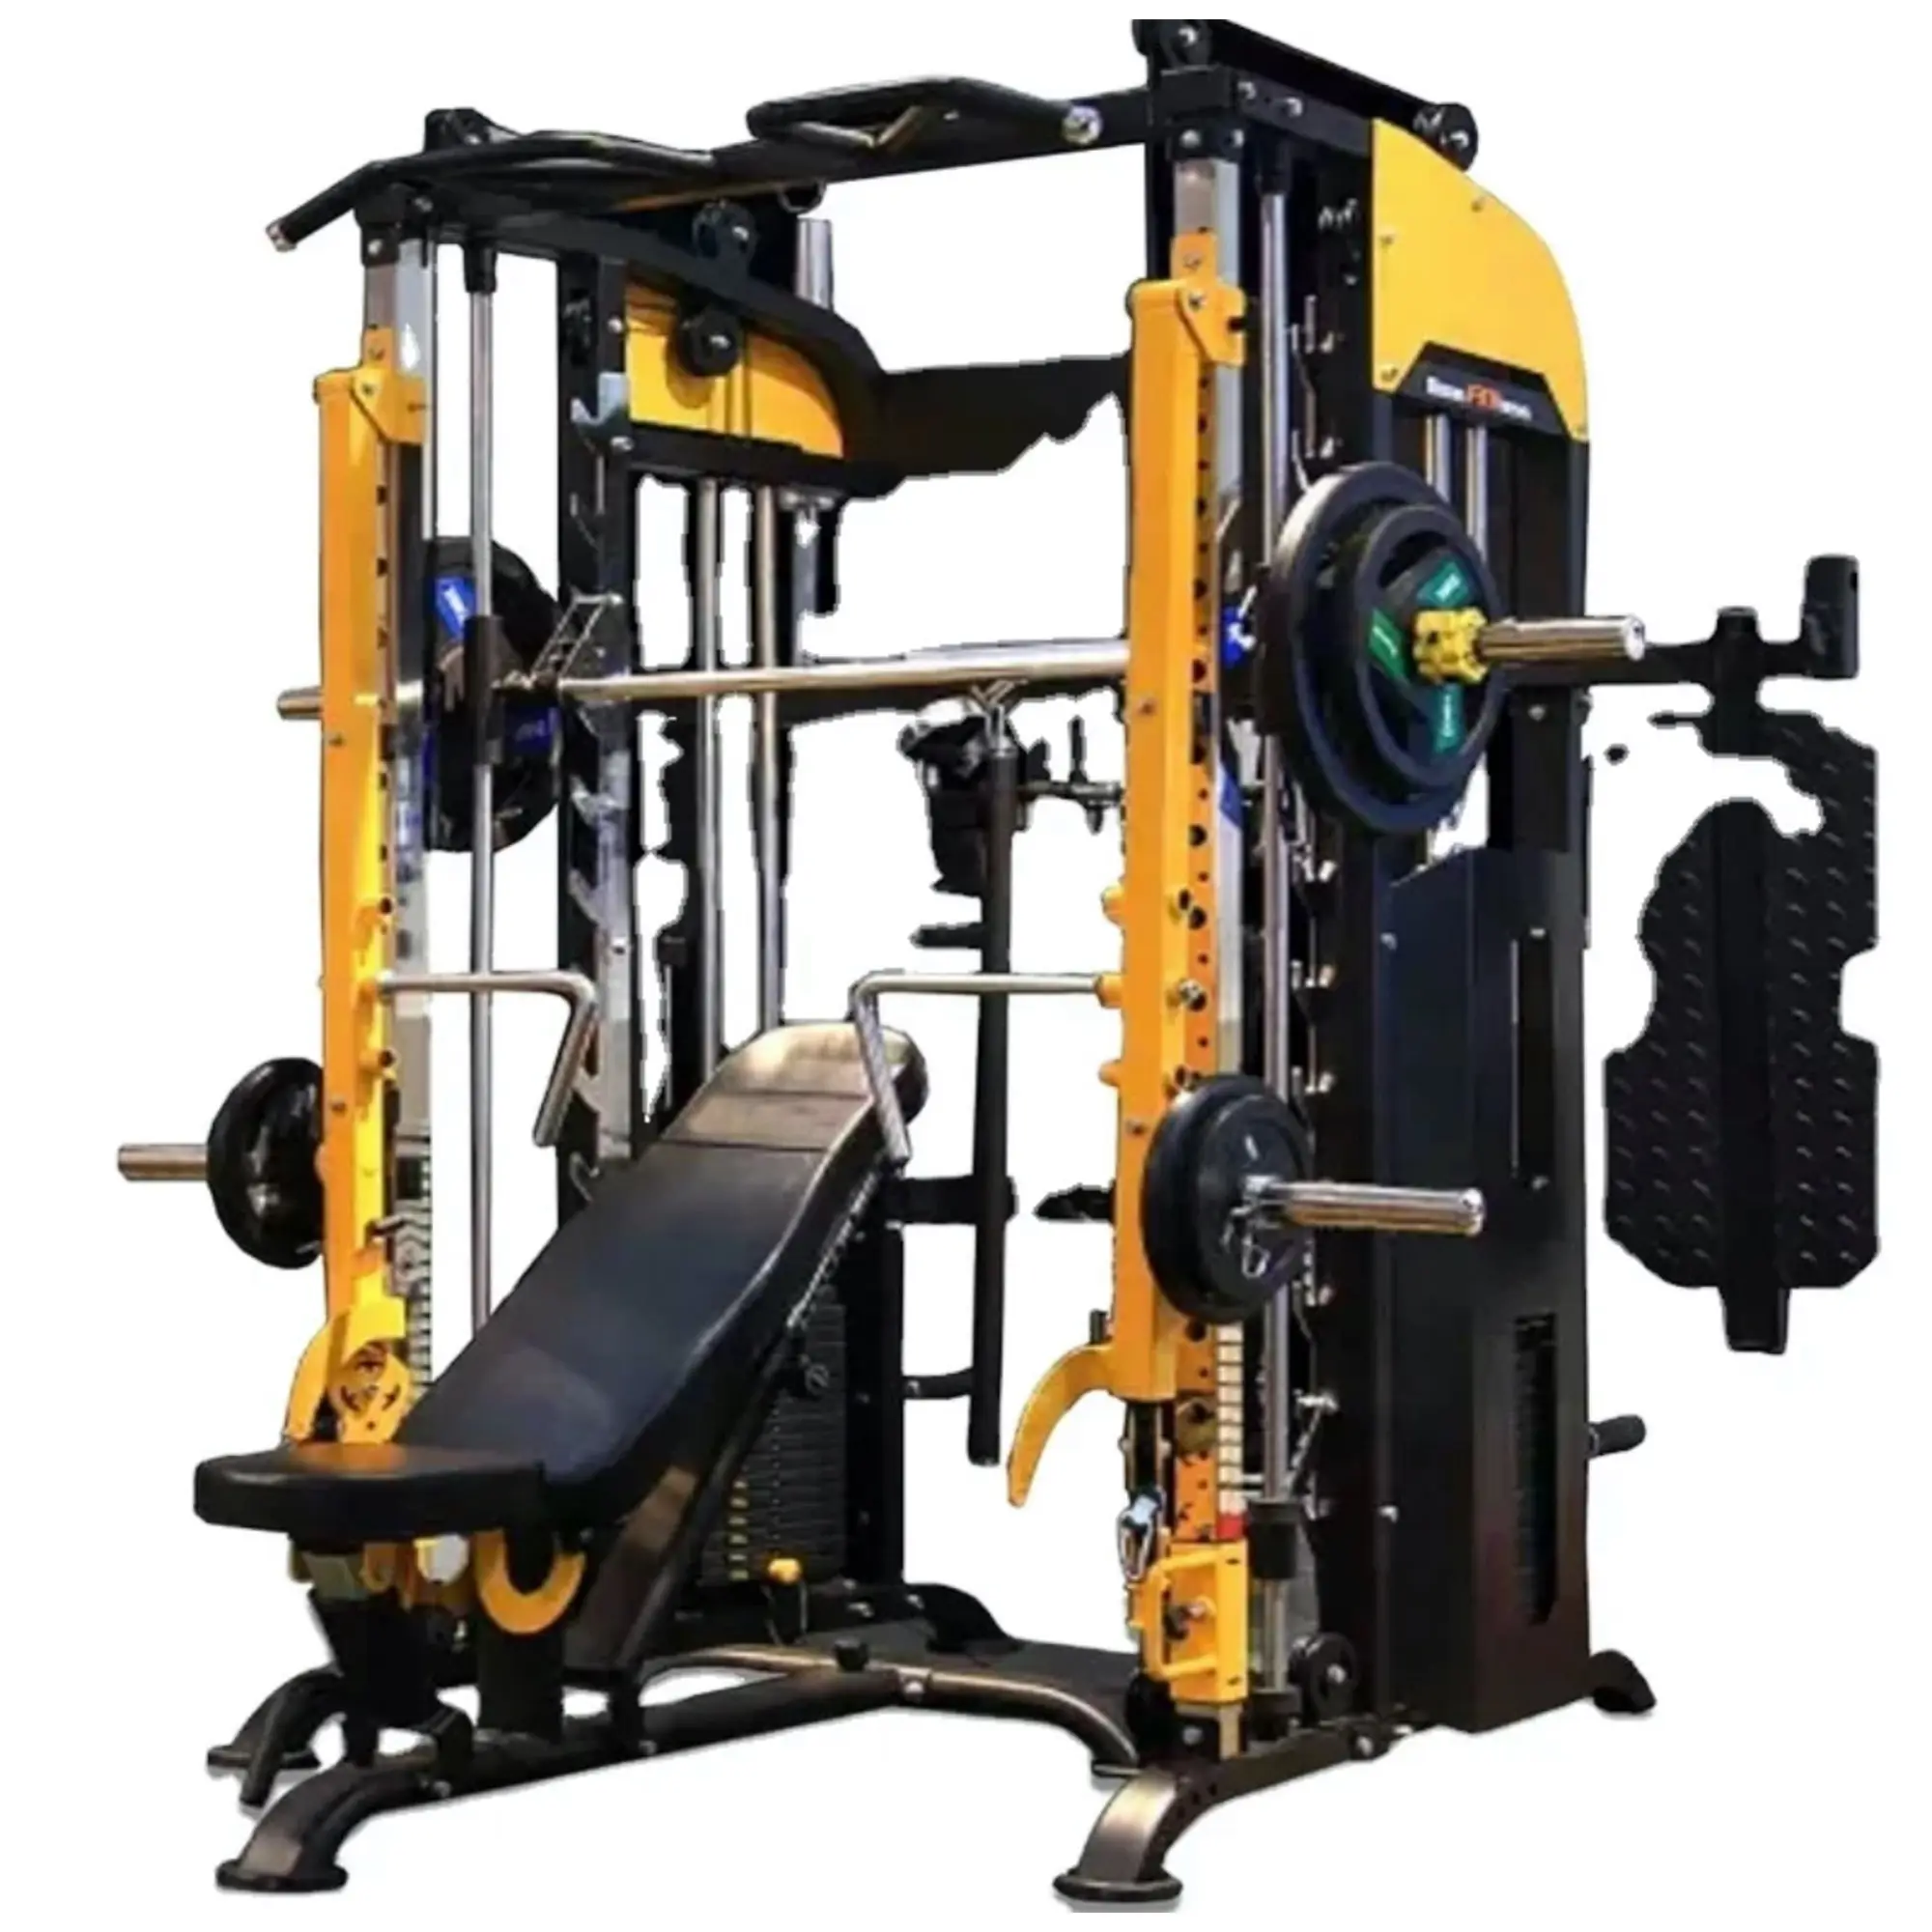 Smith Machine Strength Comprehensive Training Equipment Set Combination Household and Commercial Fitness Multi functional